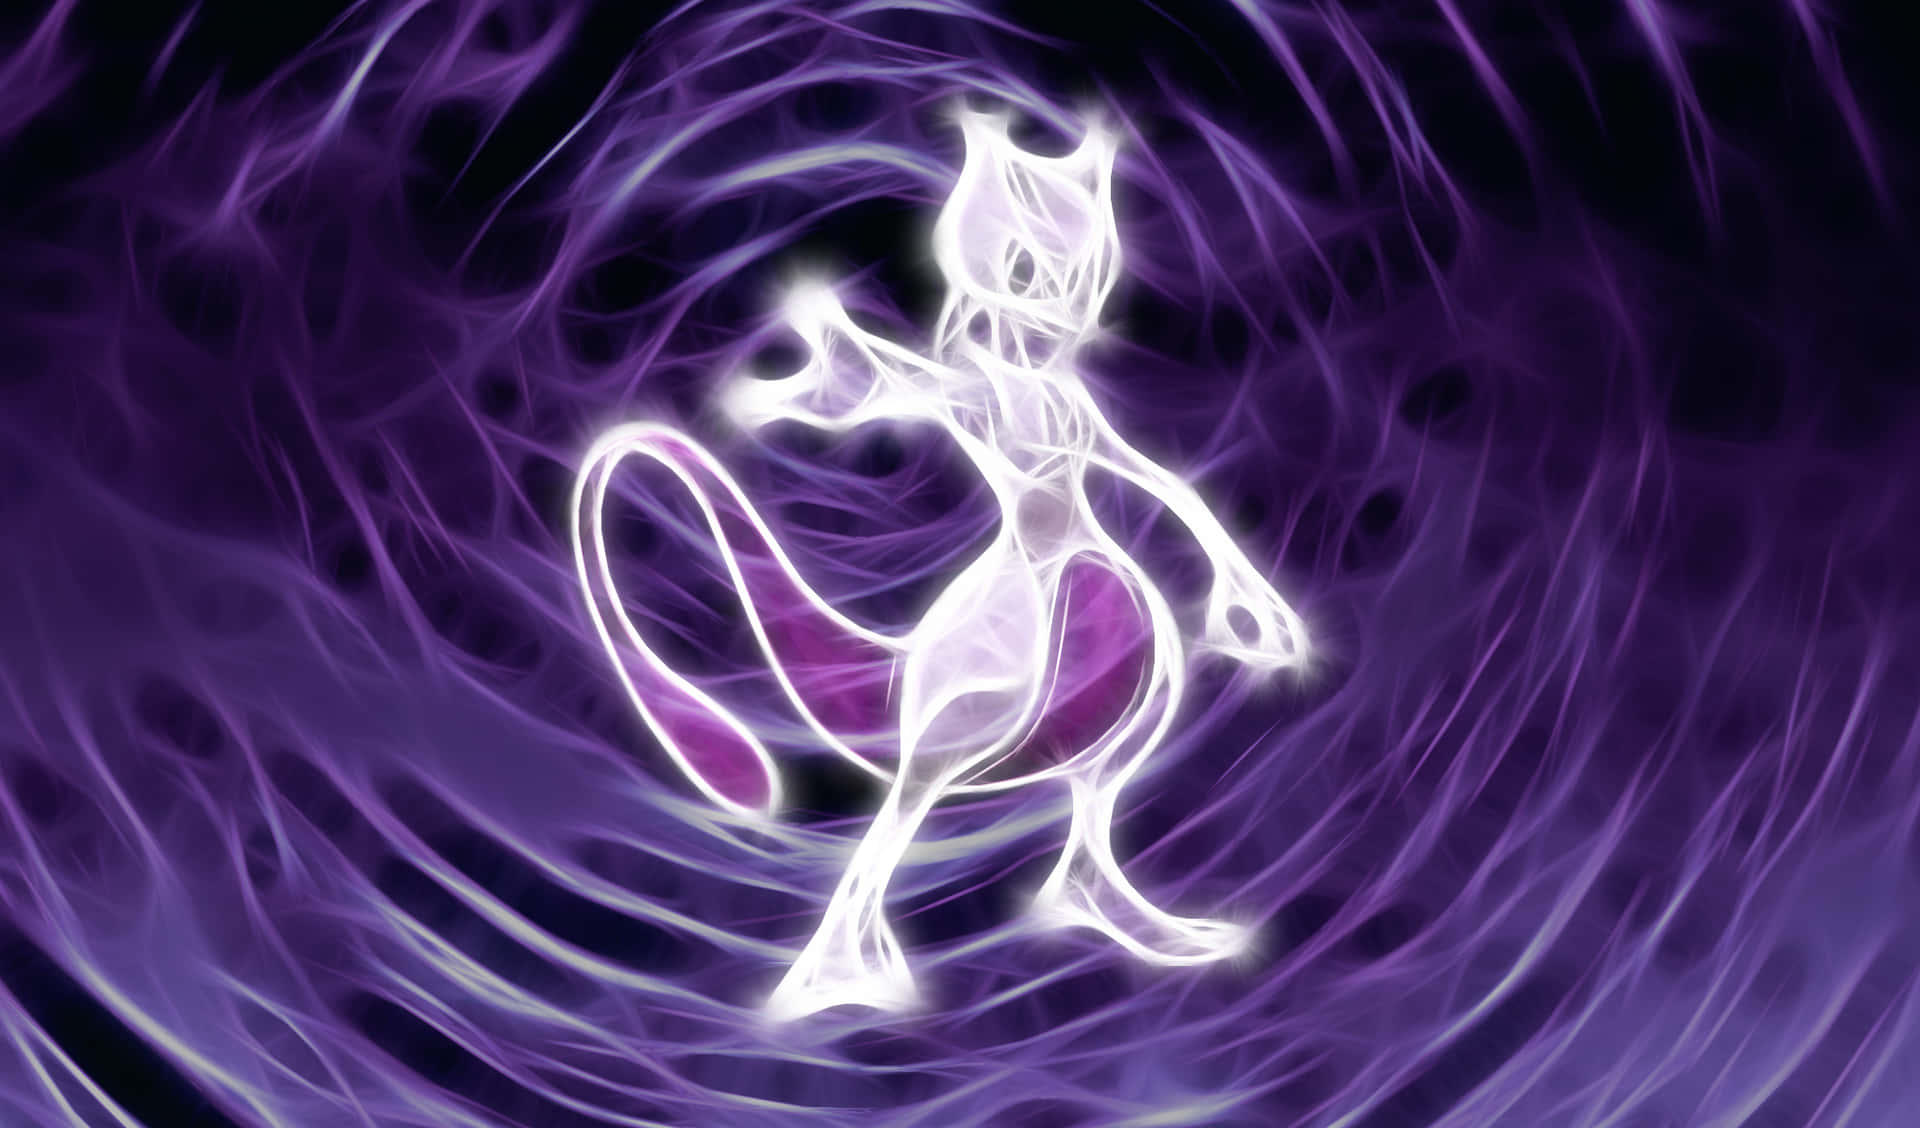 Get ready to explore the wonderful world of Pokemon with Mew! Wallpaper